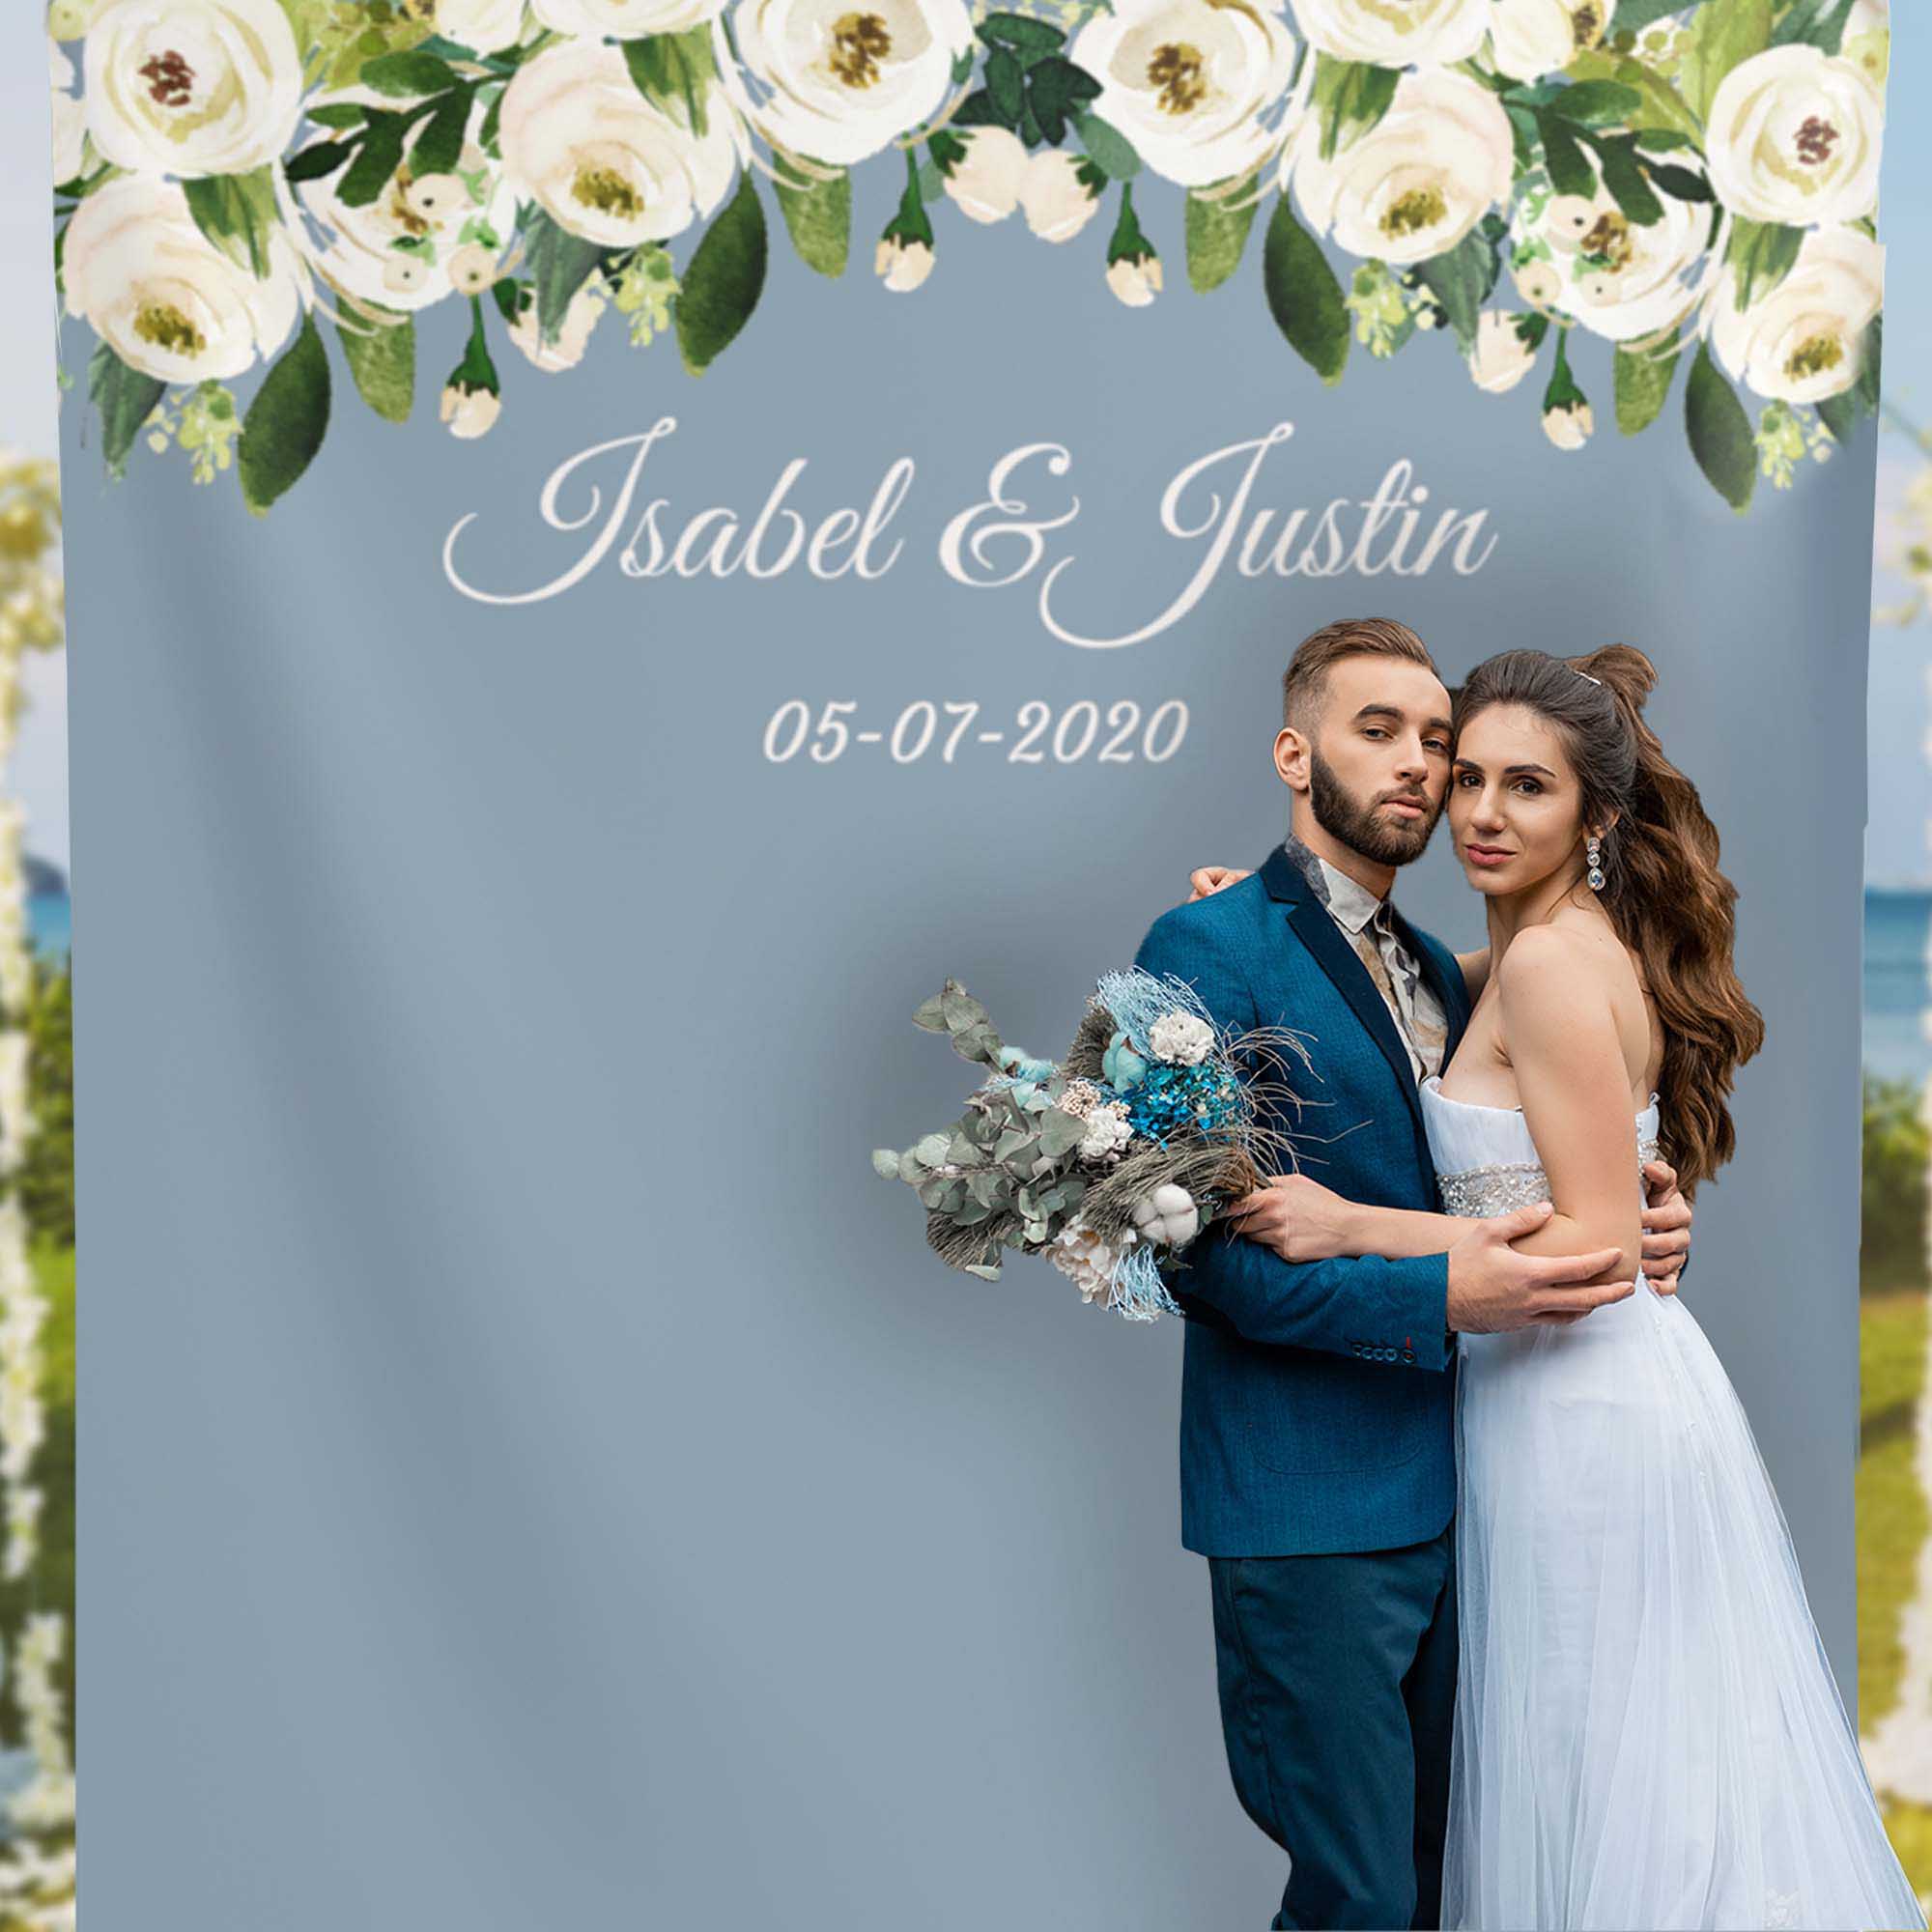 Floral Backdrop for a Dusty Blue Wedding Theme